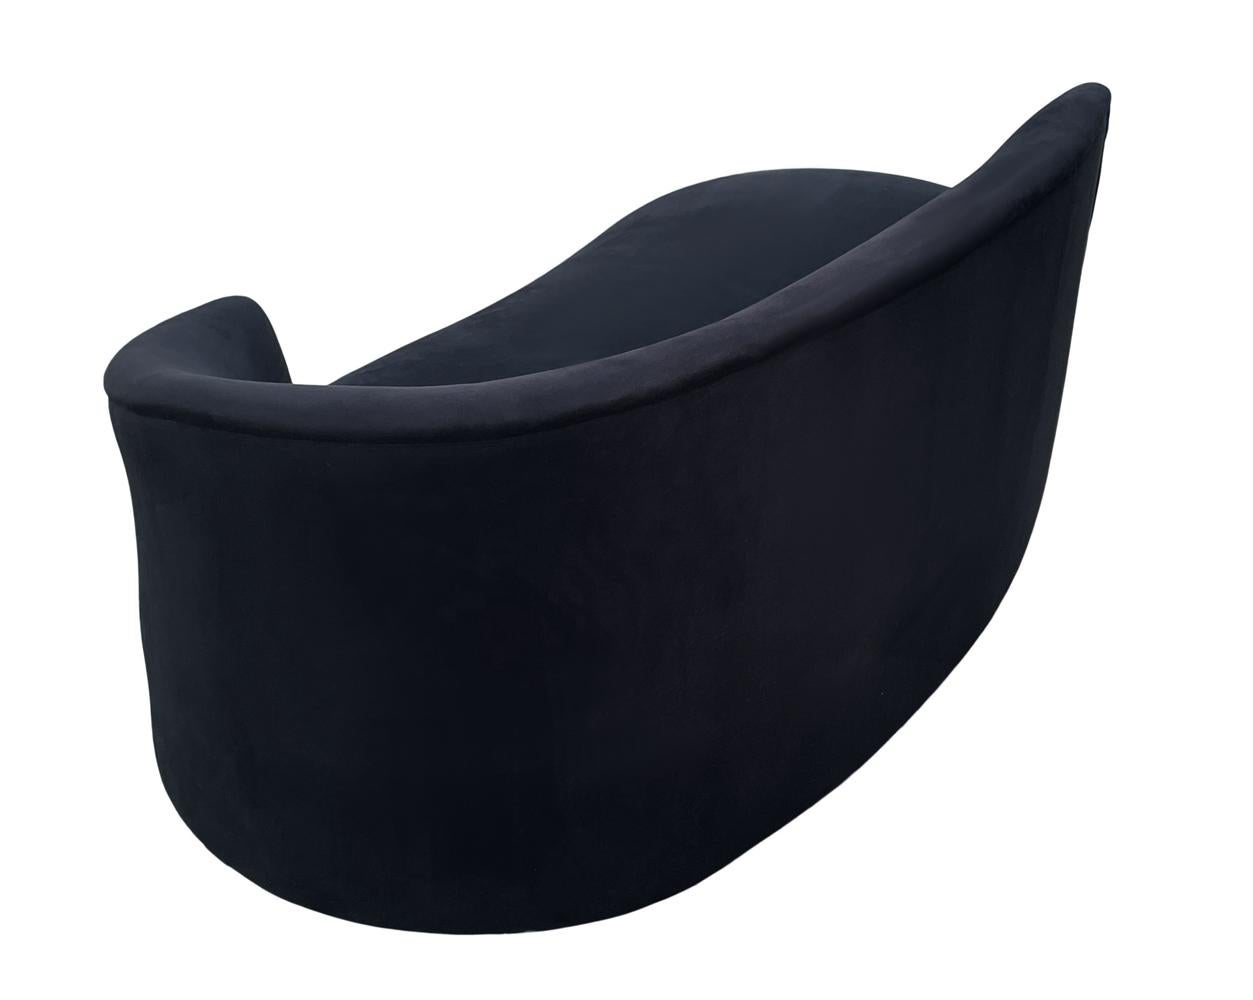 American Mid Century Post Modern Curved Chaise Lounge or Loveseat in Black Velvet For Sale